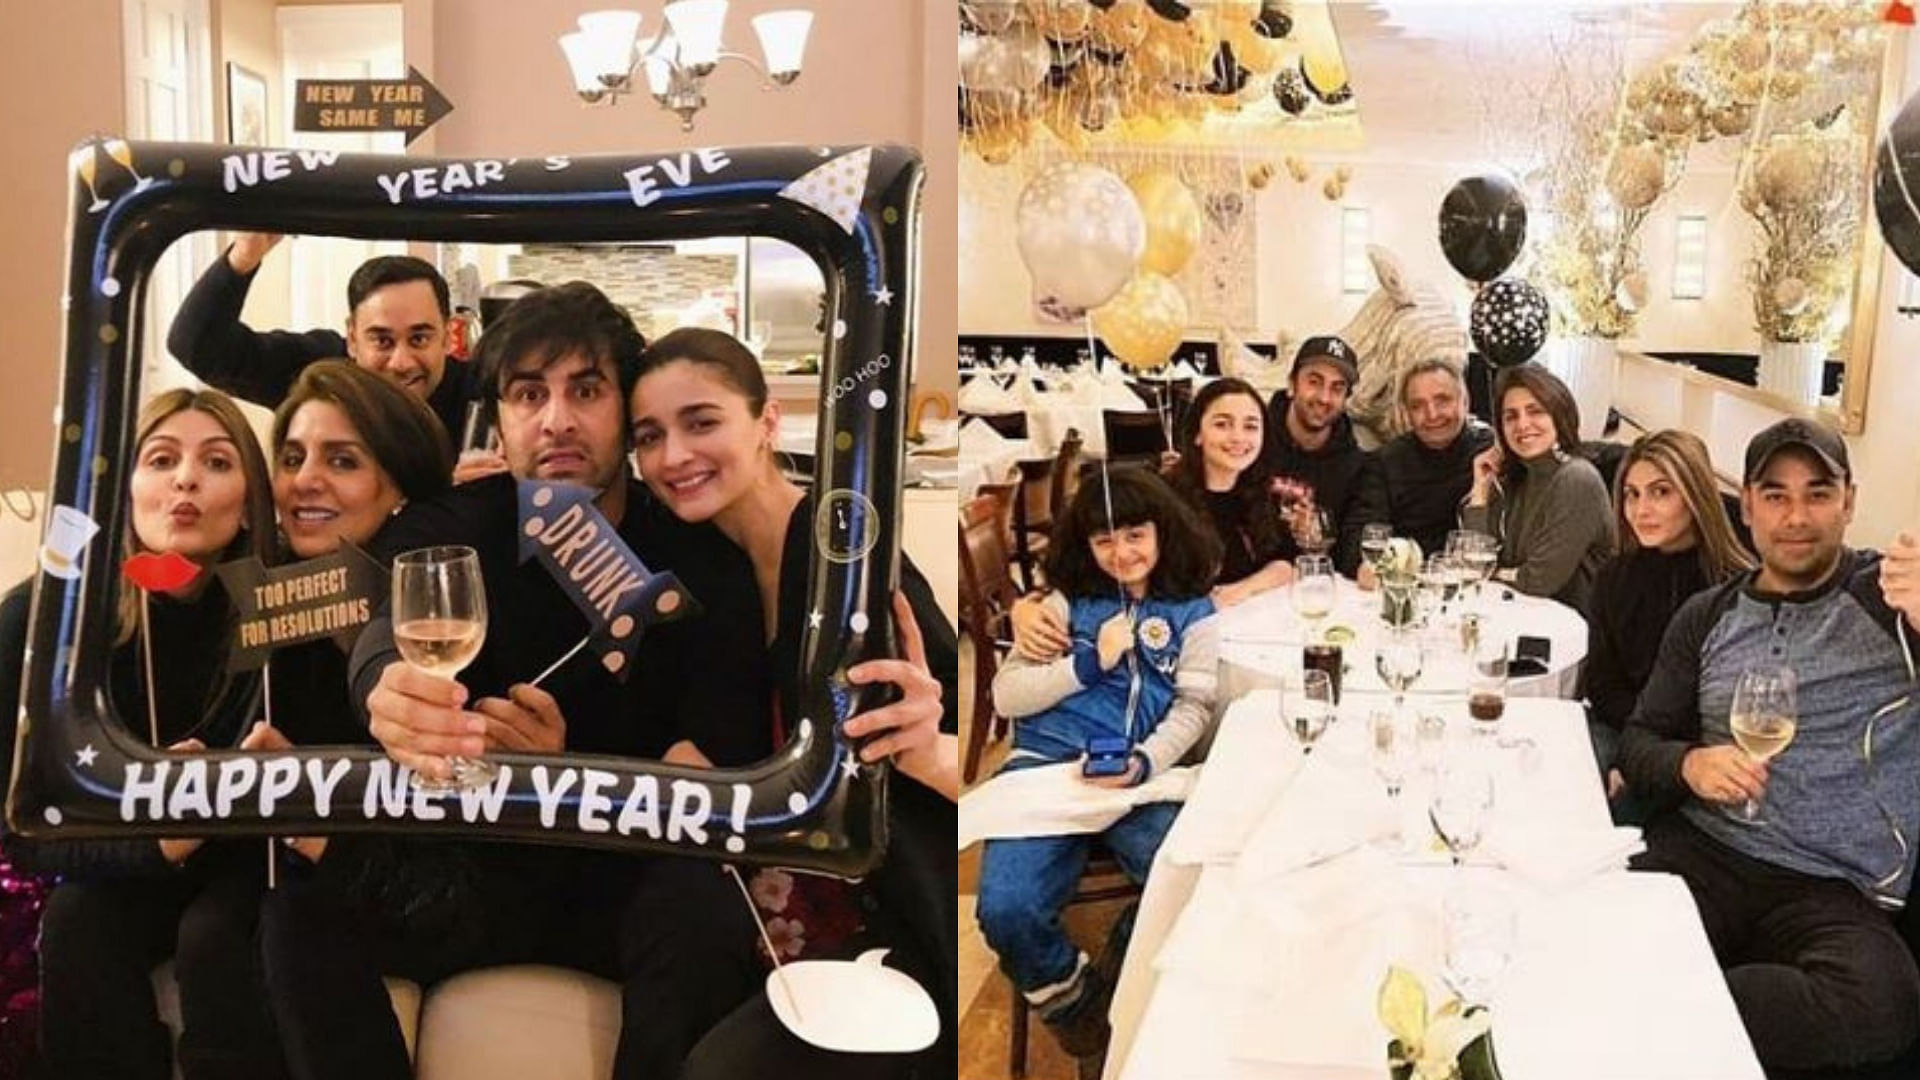 Rishi and Neetu Kapoor brought in the New Year with family.